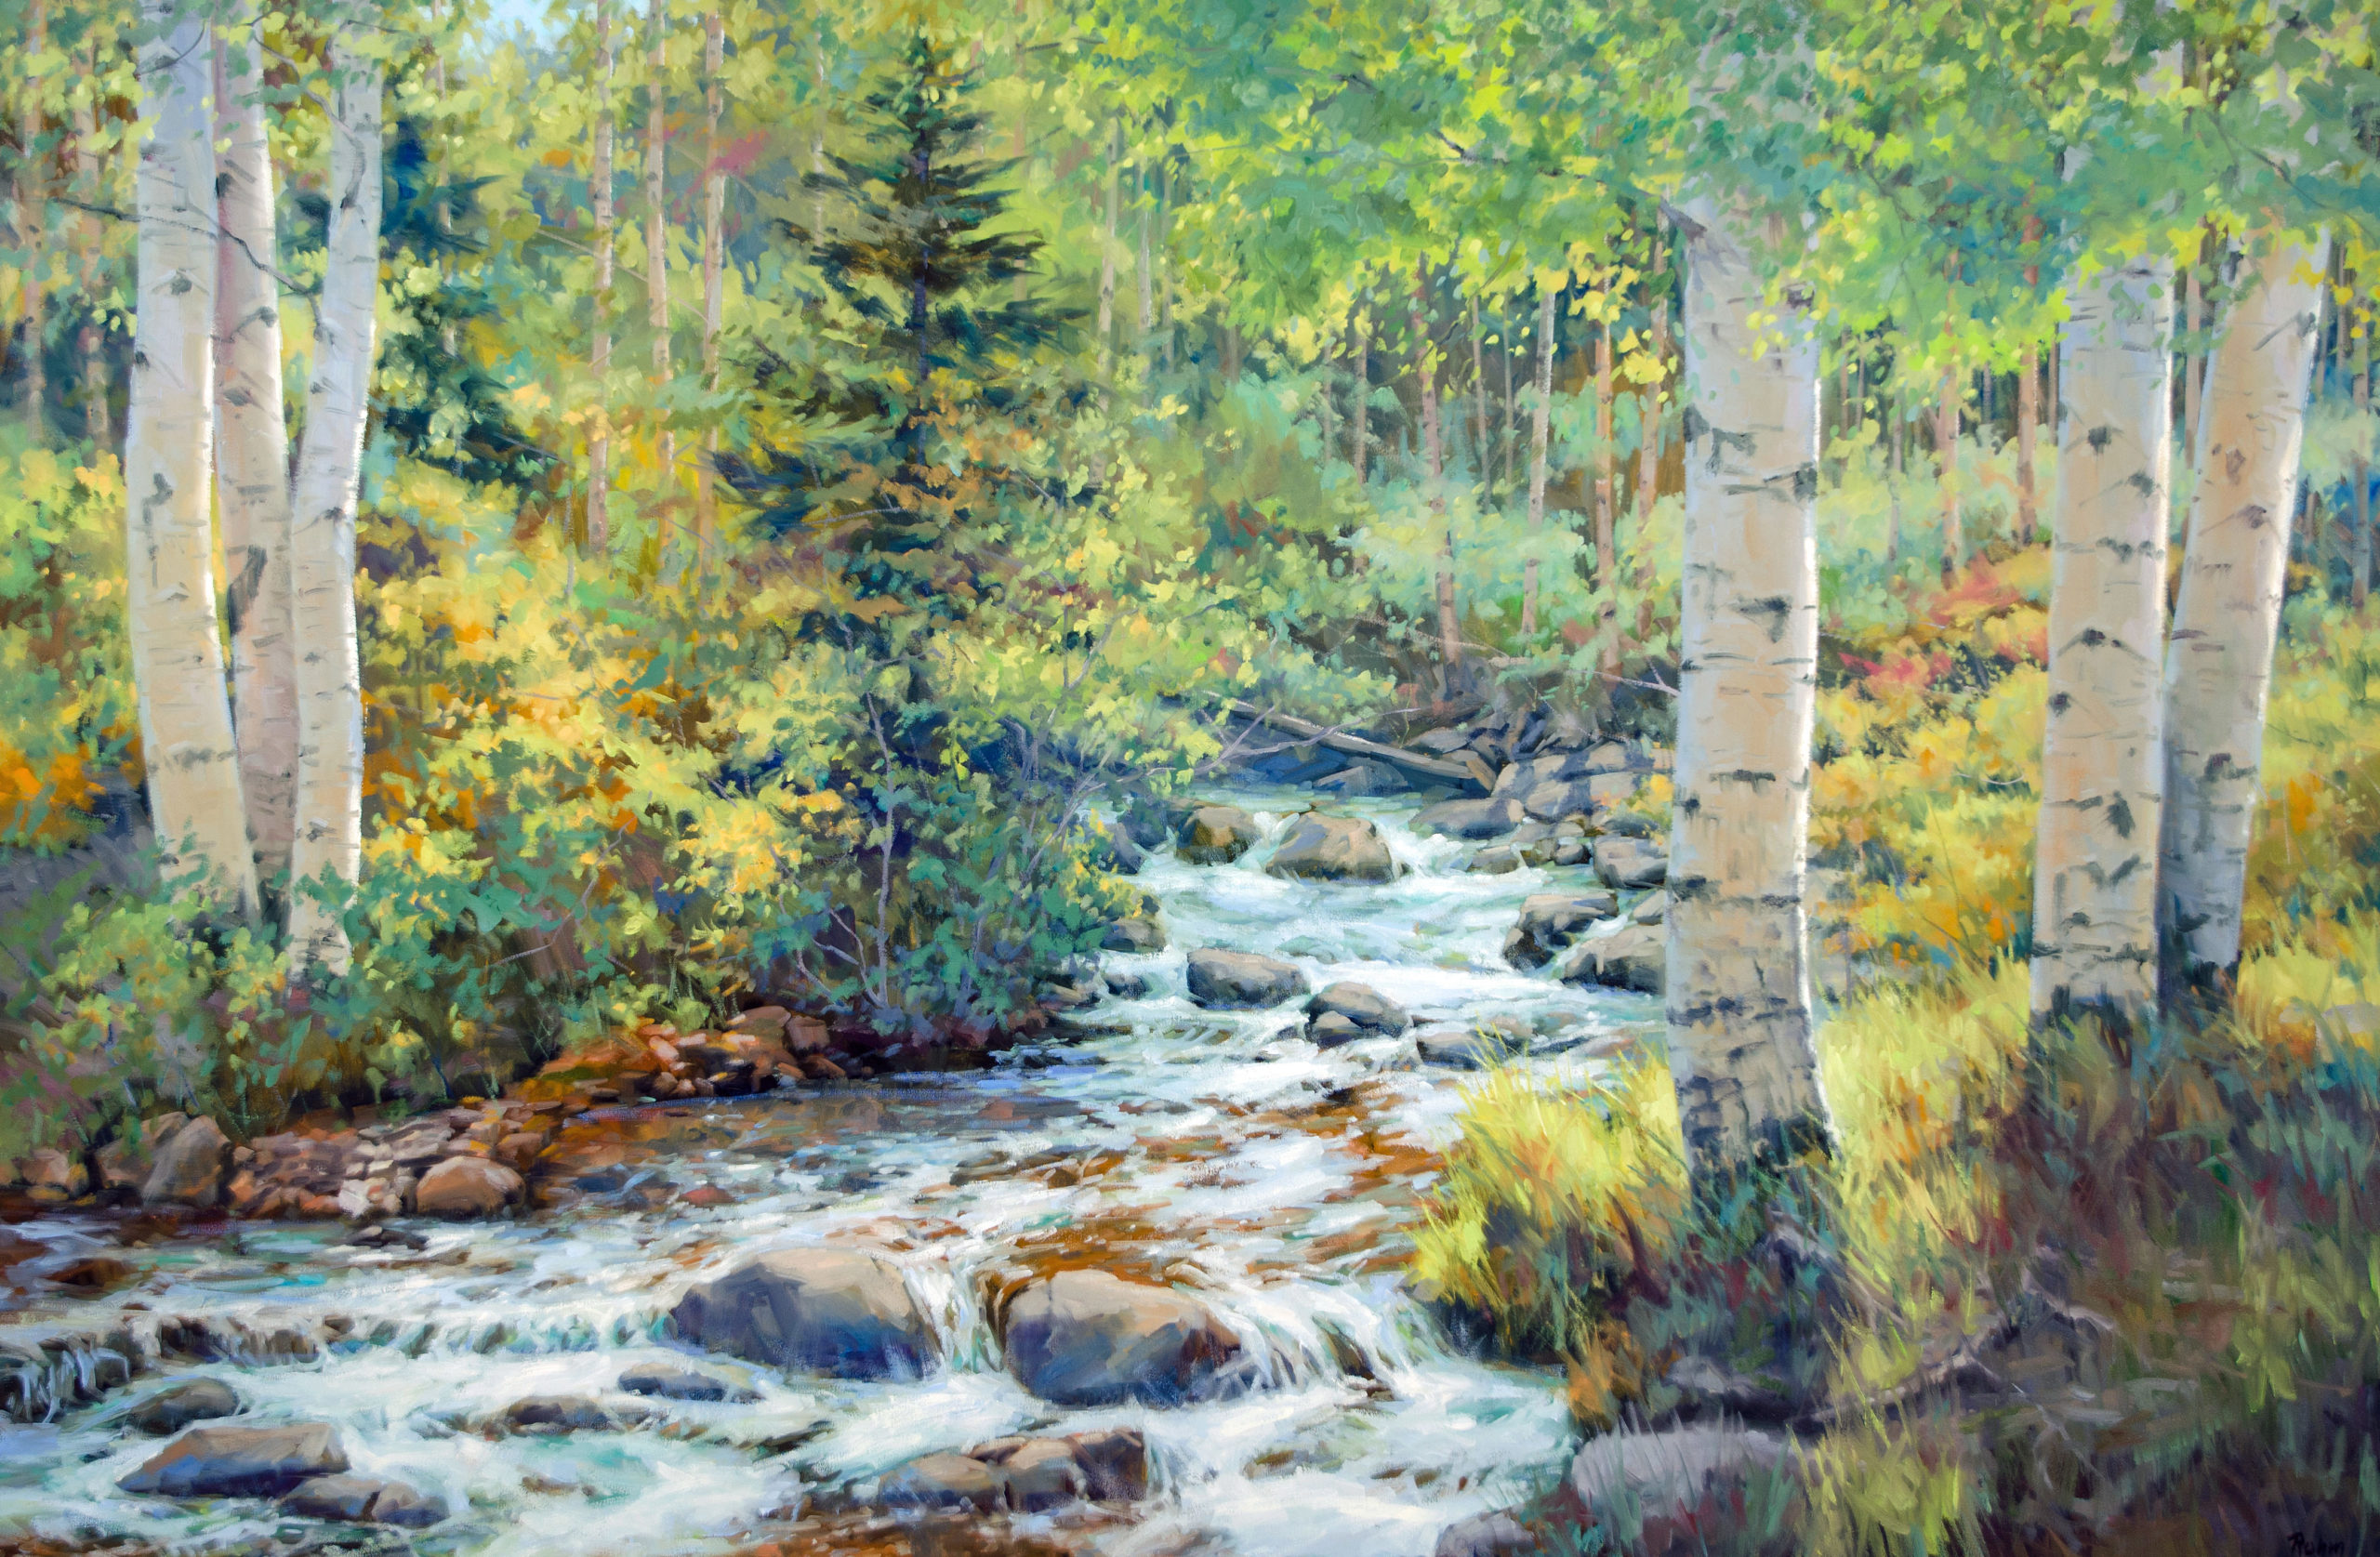 Bob Rohm, "Summer Flow in the Rocky Mountains"